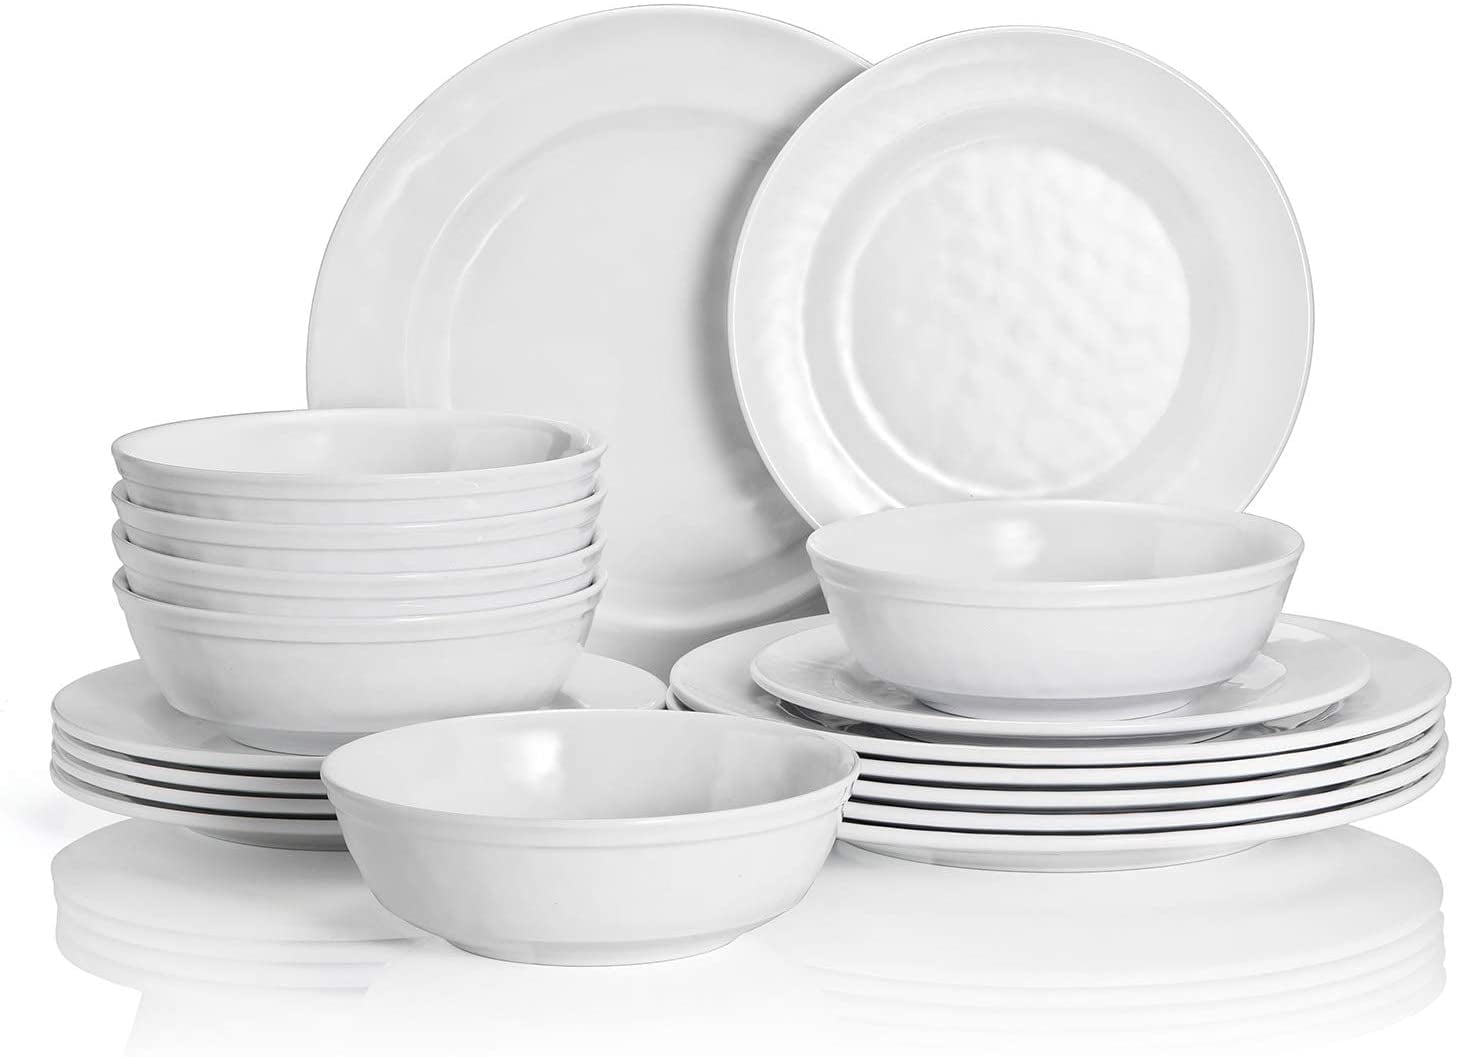 What Is Melamine? Safety for Use in Dishes